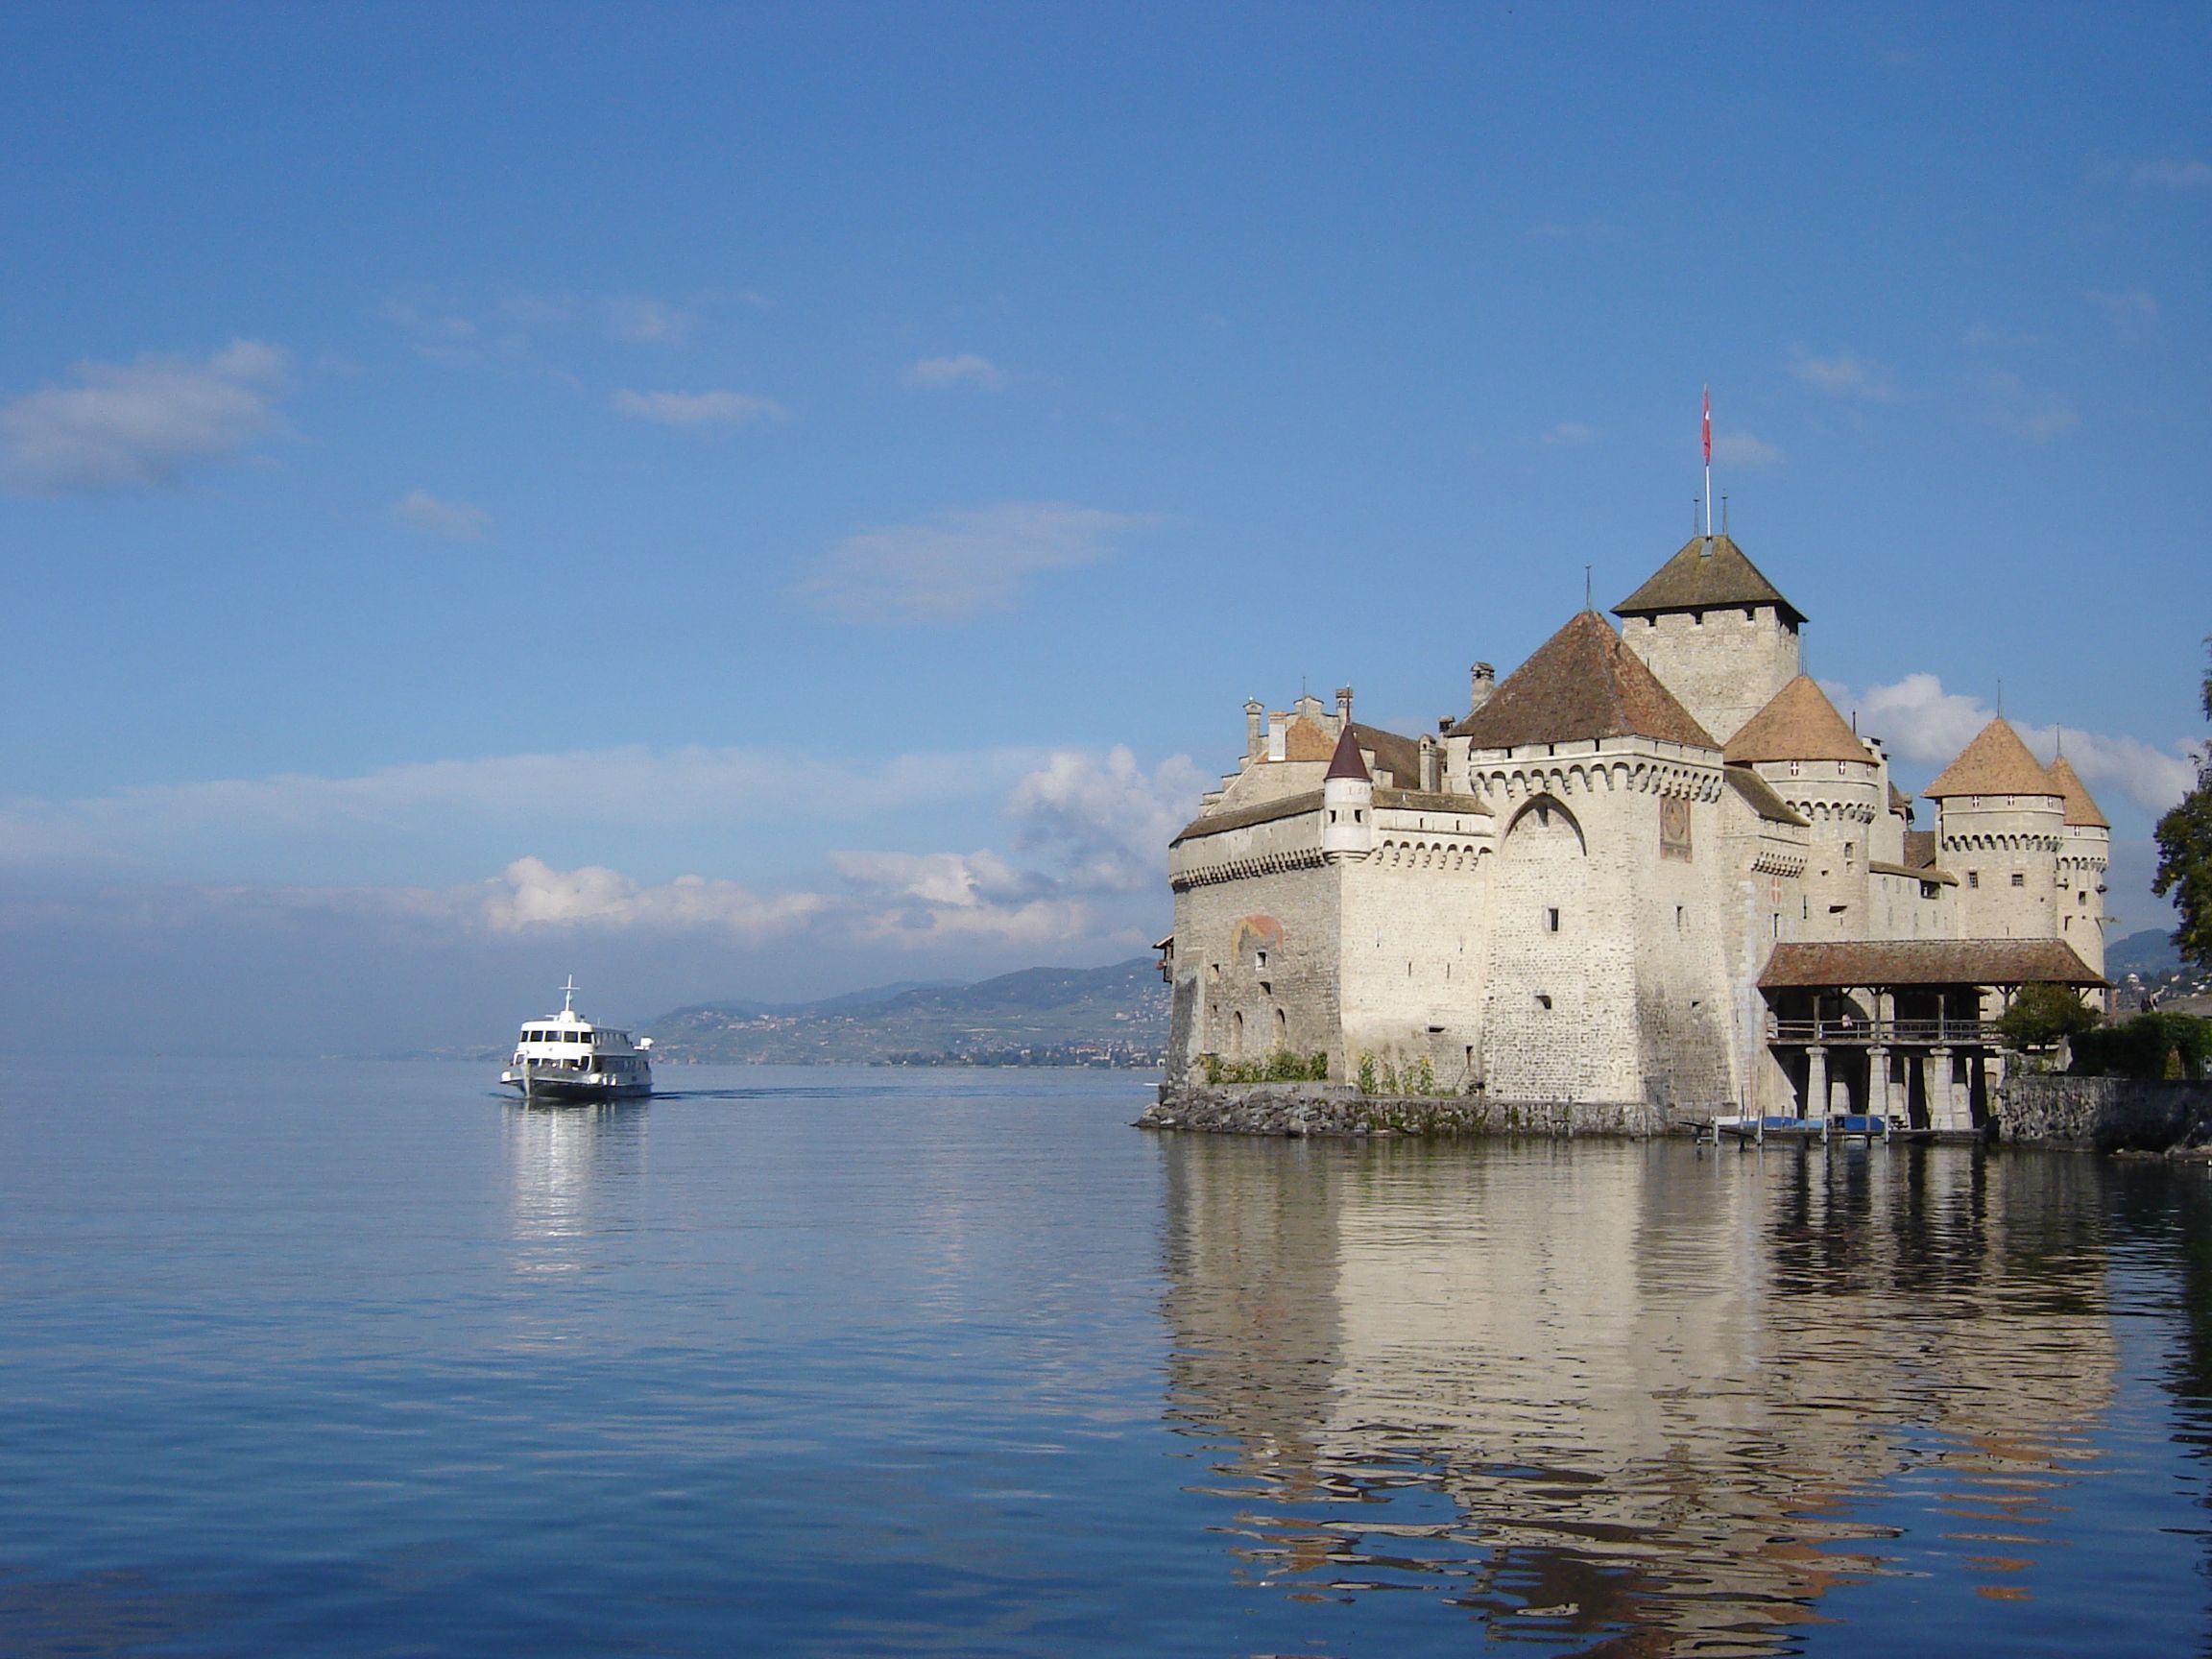 Montreux and the Swiss Riviera